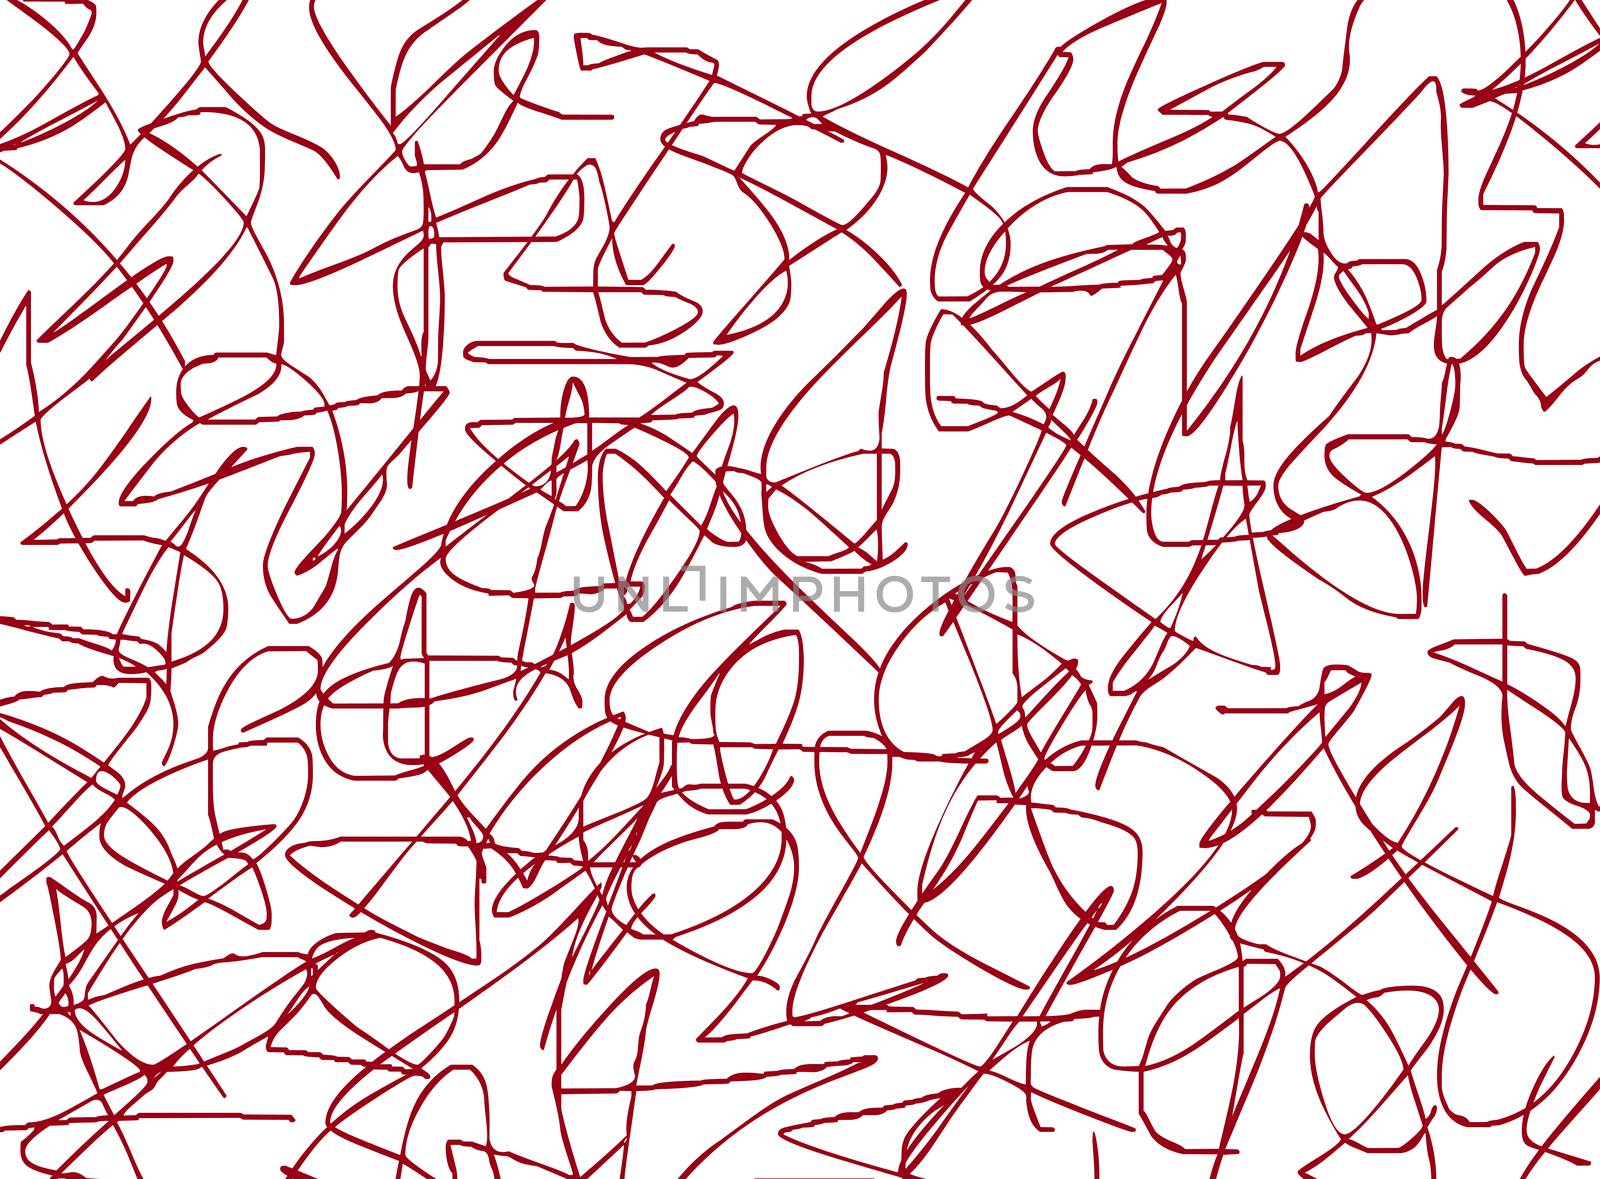 scrawl red on white background. Abstract illustration scribble. children drawing doodles. babies who write. marking text.